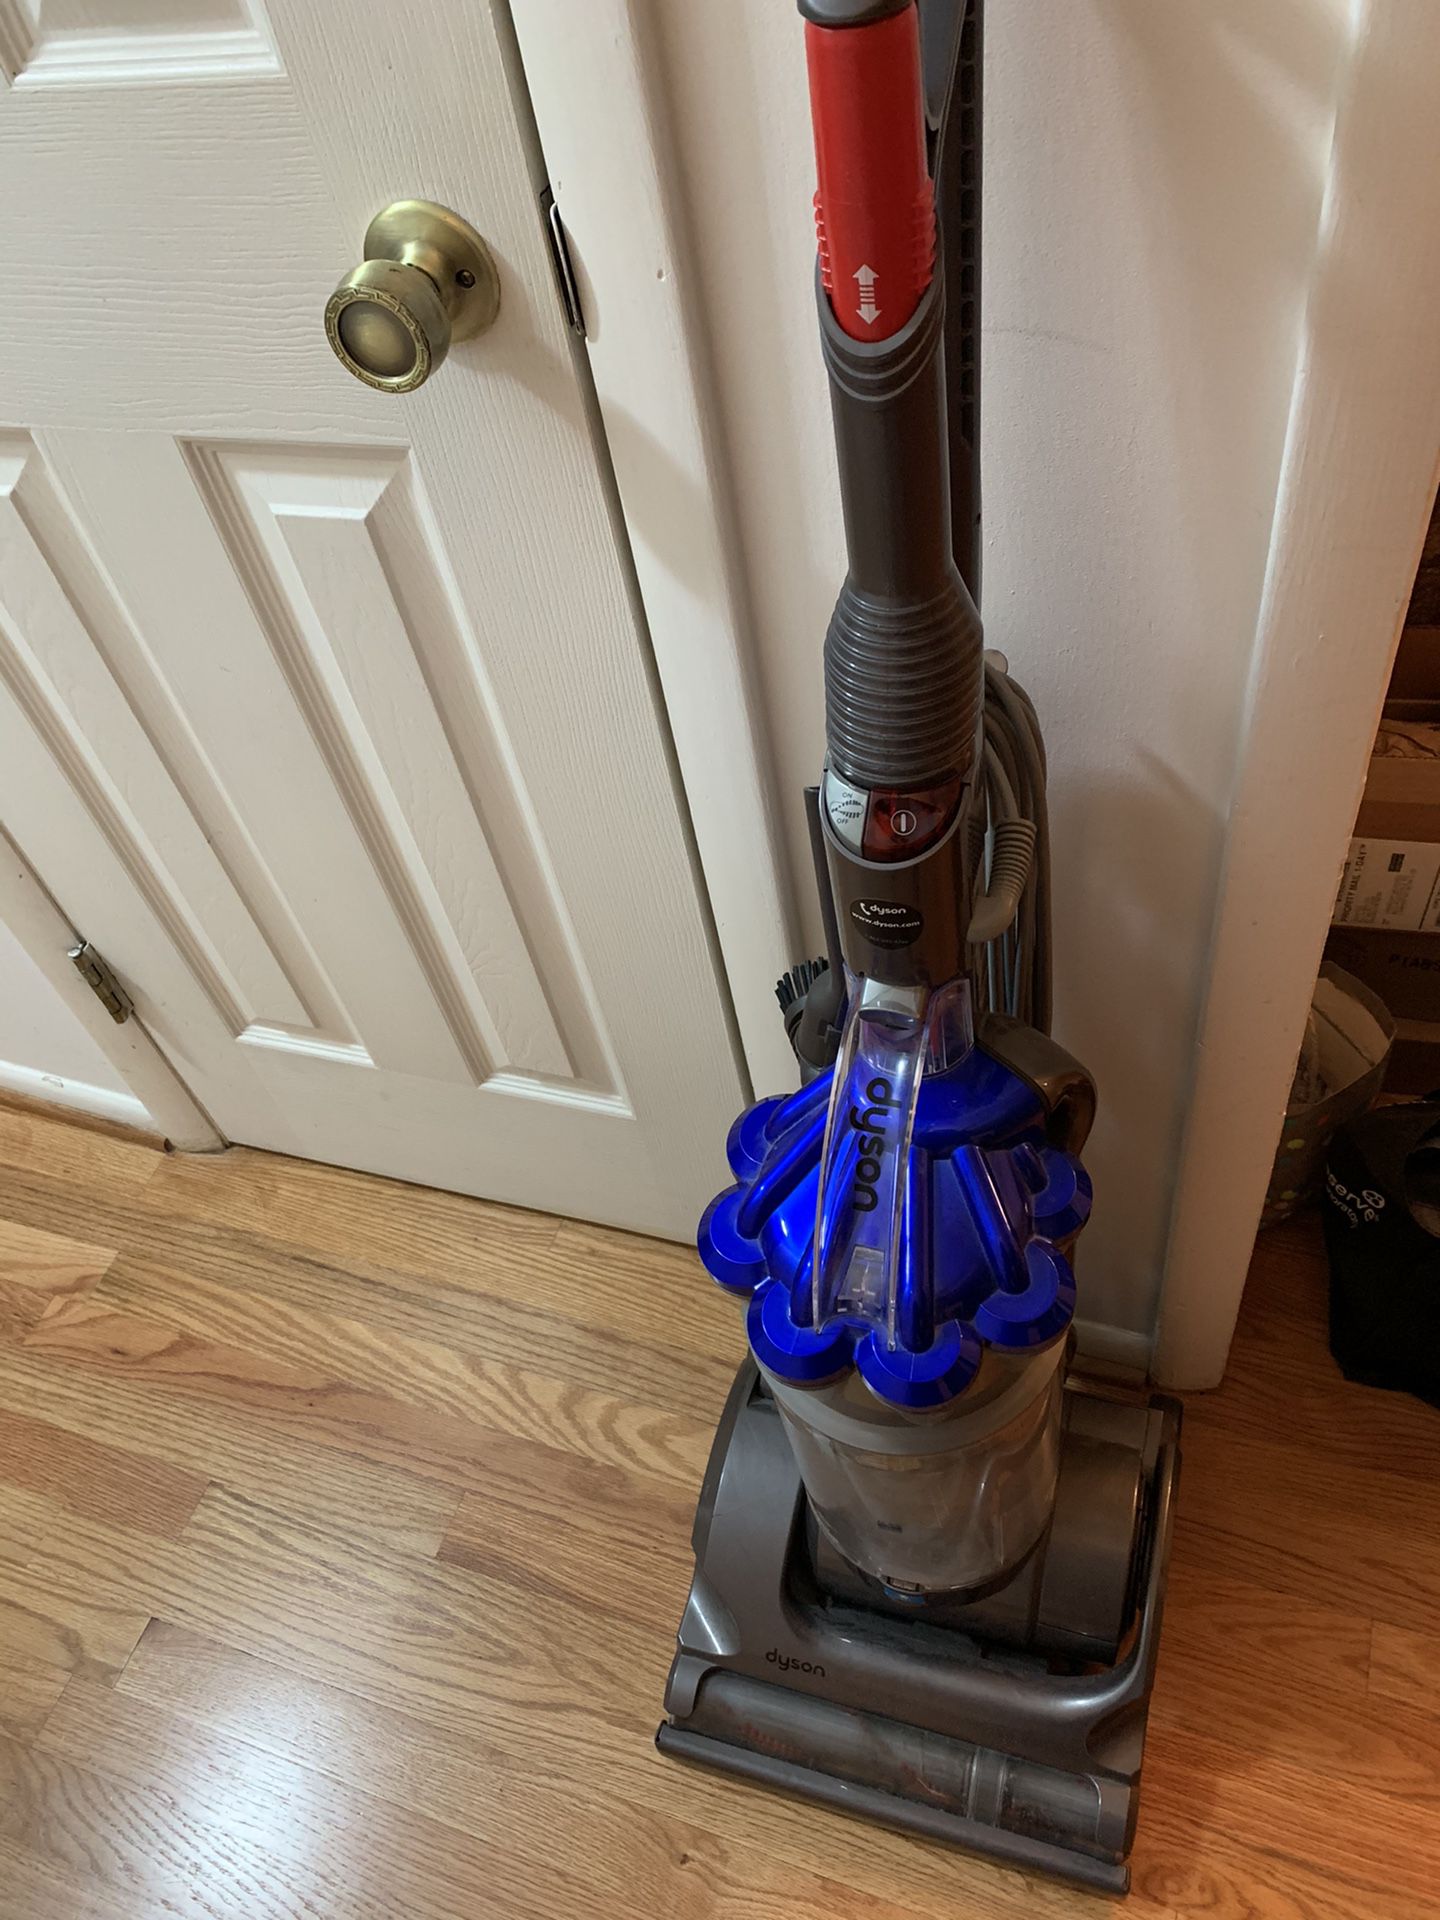 Dyson DC 17 Upright Bagless Vacuum with attachments